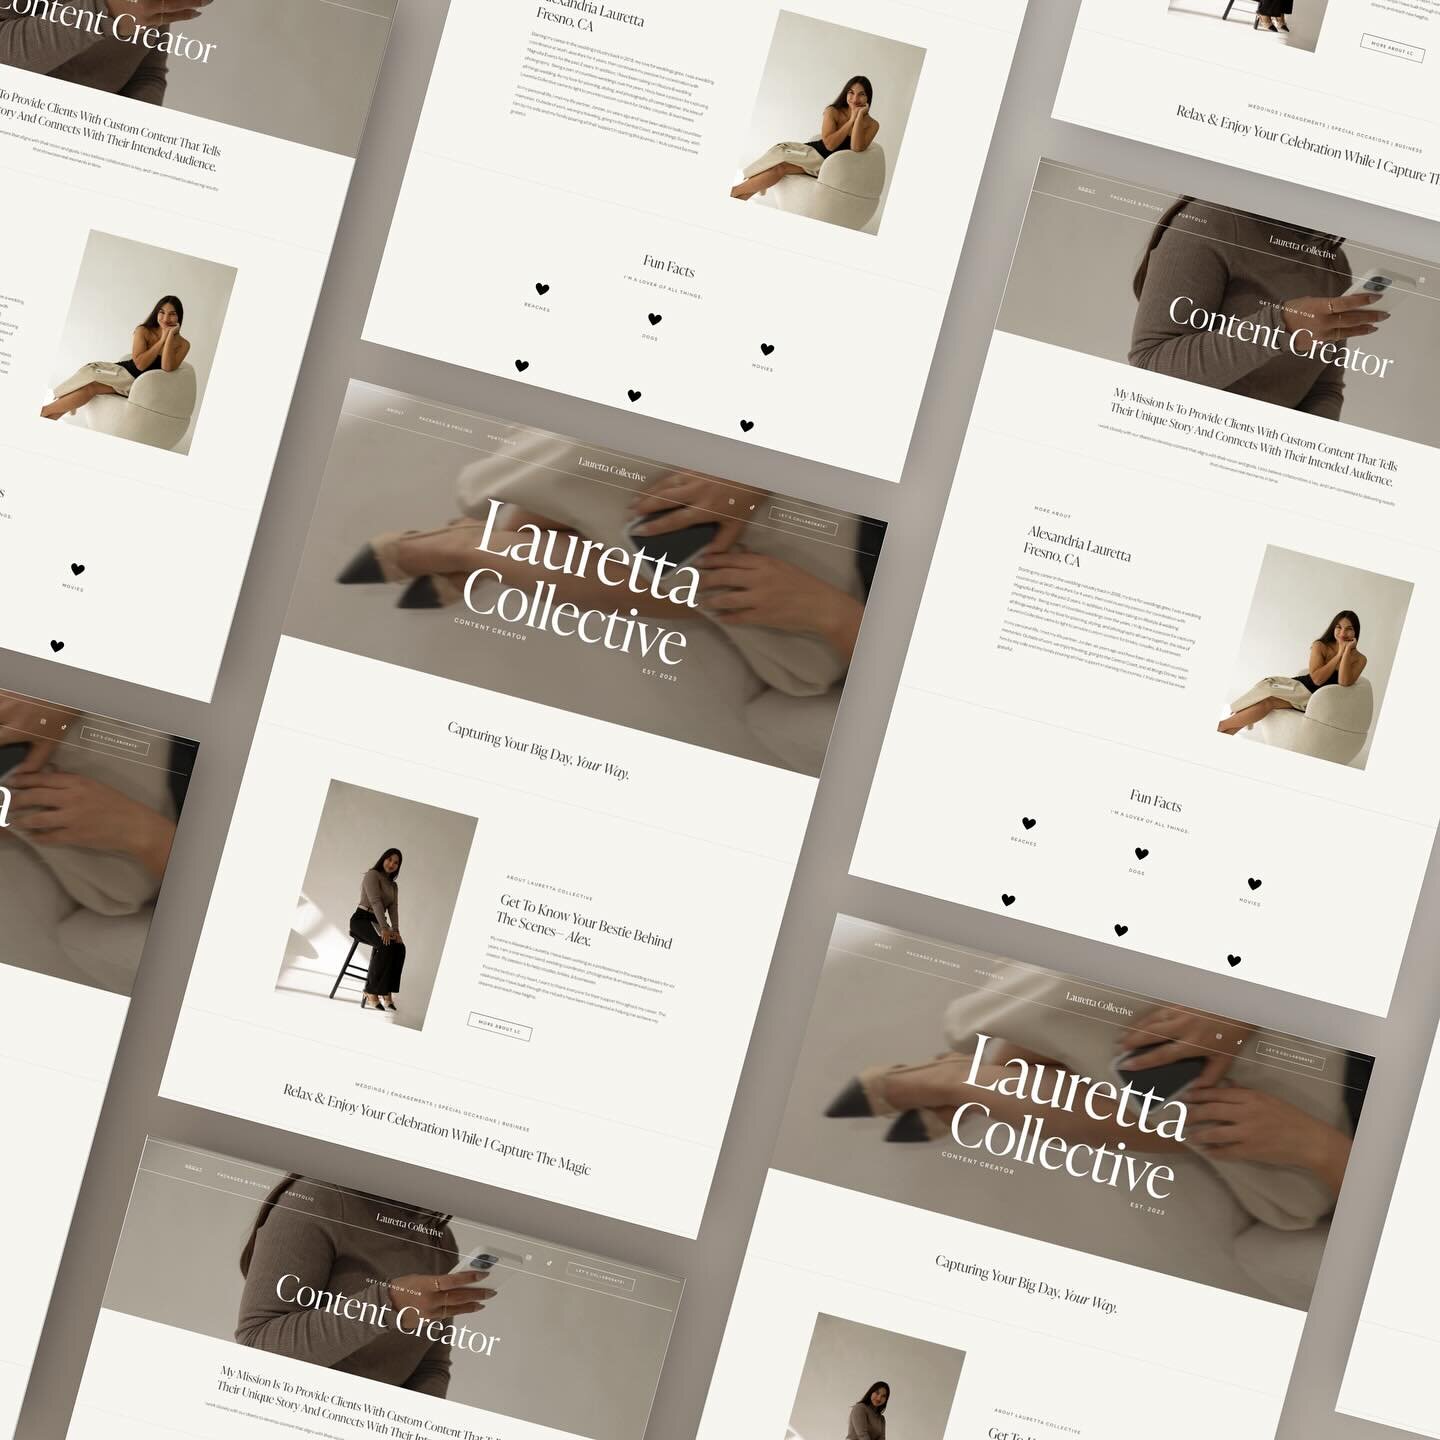 Soft neutrals and minimalism 🫶🏼

It was an honor to build a site for Alex at @laurettacollective to display her services and make her personality shine through her brand. Check out her site in my portfolio, or visit www.laurettacollective.com 🤍
.
